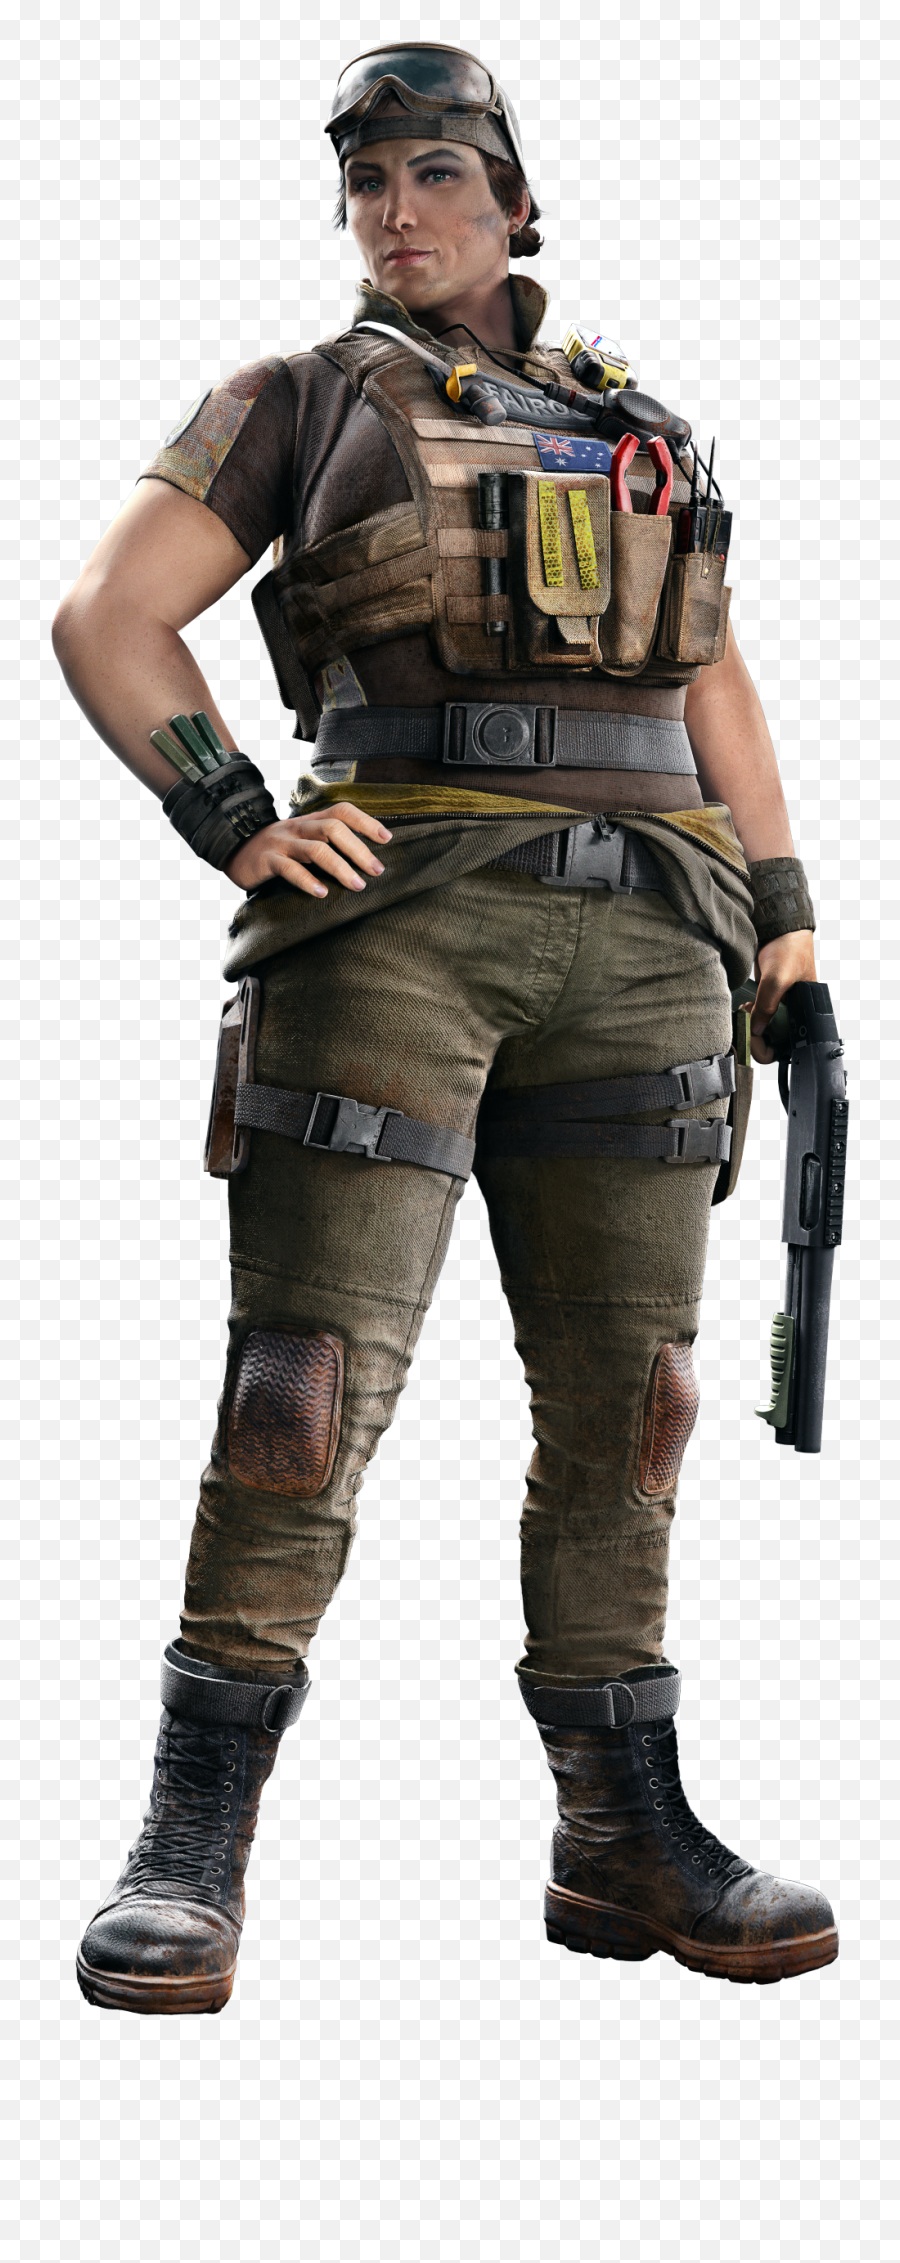 Who Is The Thickest Rainbow 6 Operator Other Than Ela - Quora Gridlock Rainbow Six Siege Png,Jackal R6 Icon